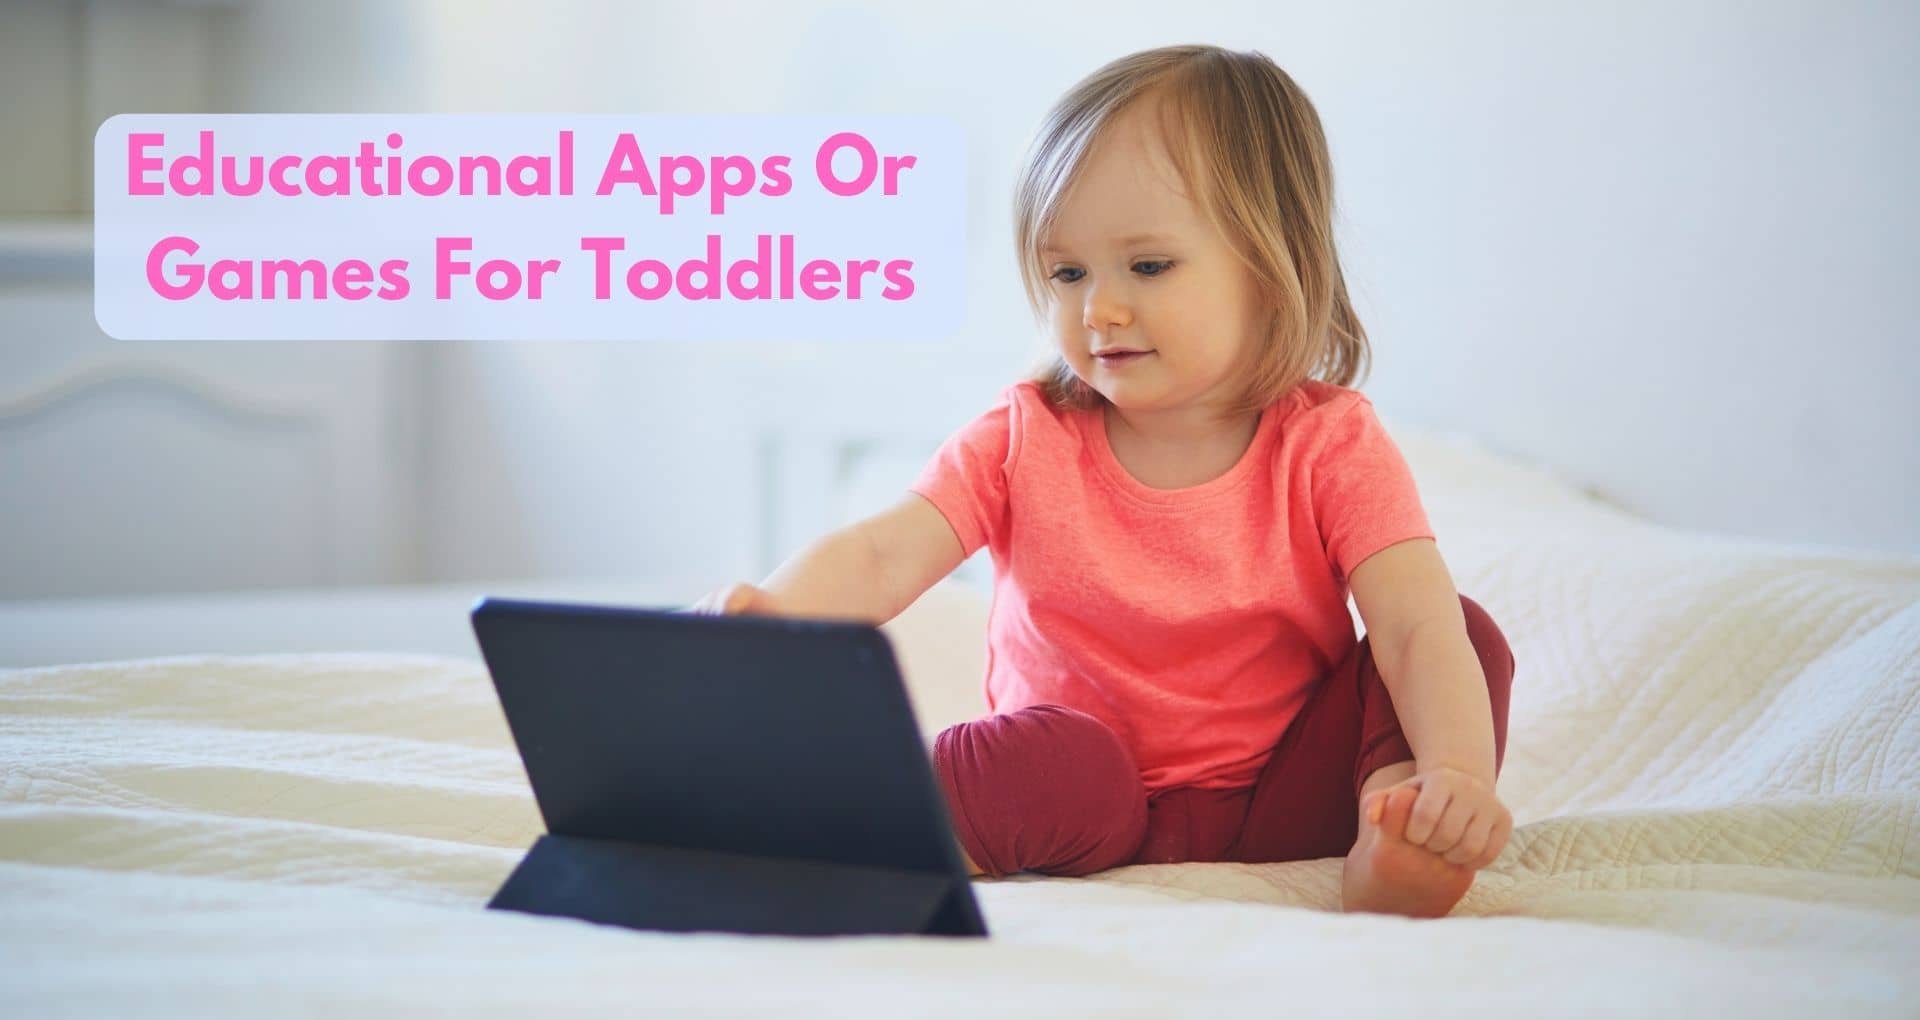 What Are Some Educational Apps For Toddlers?